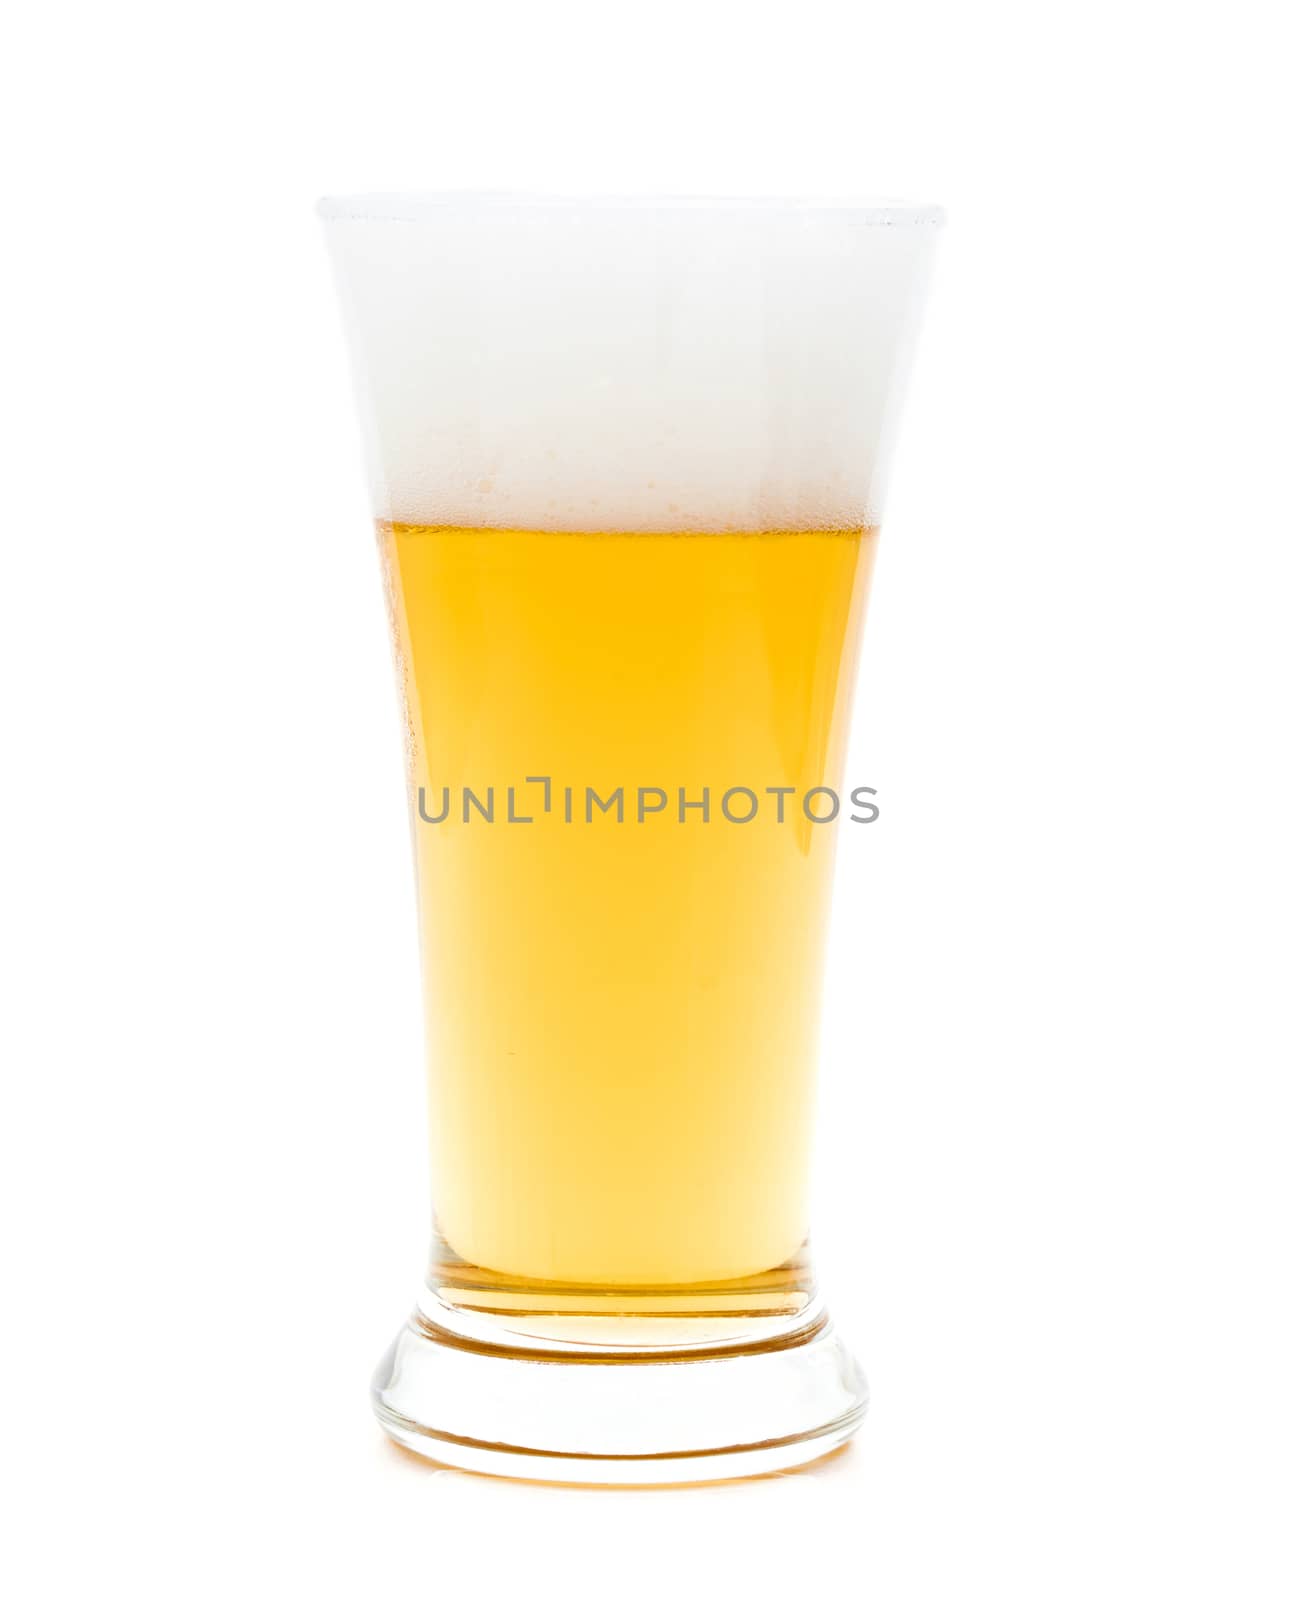 Beer in a glass on white background by sompongtom